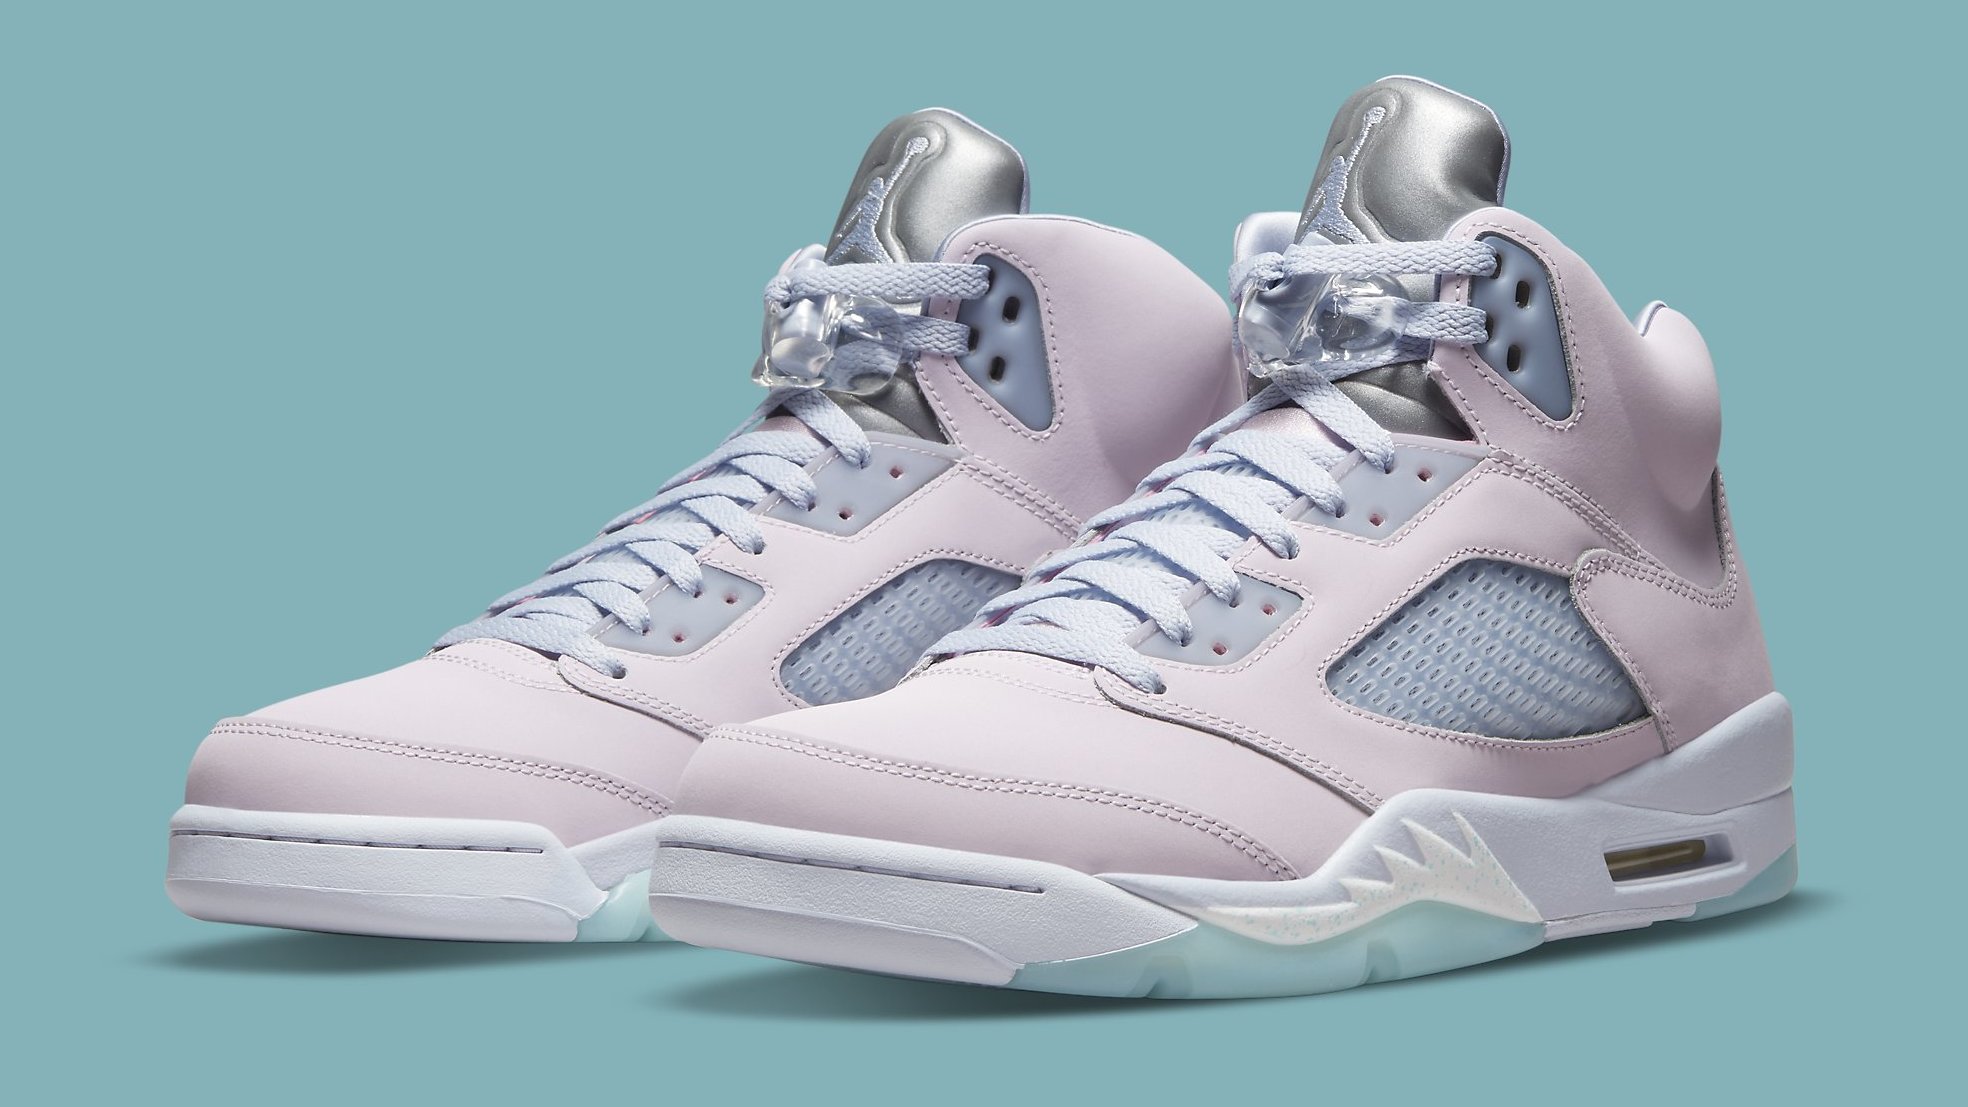 Regal Pink' Air Jordan 5 Is Officially Releasing in May | Complex